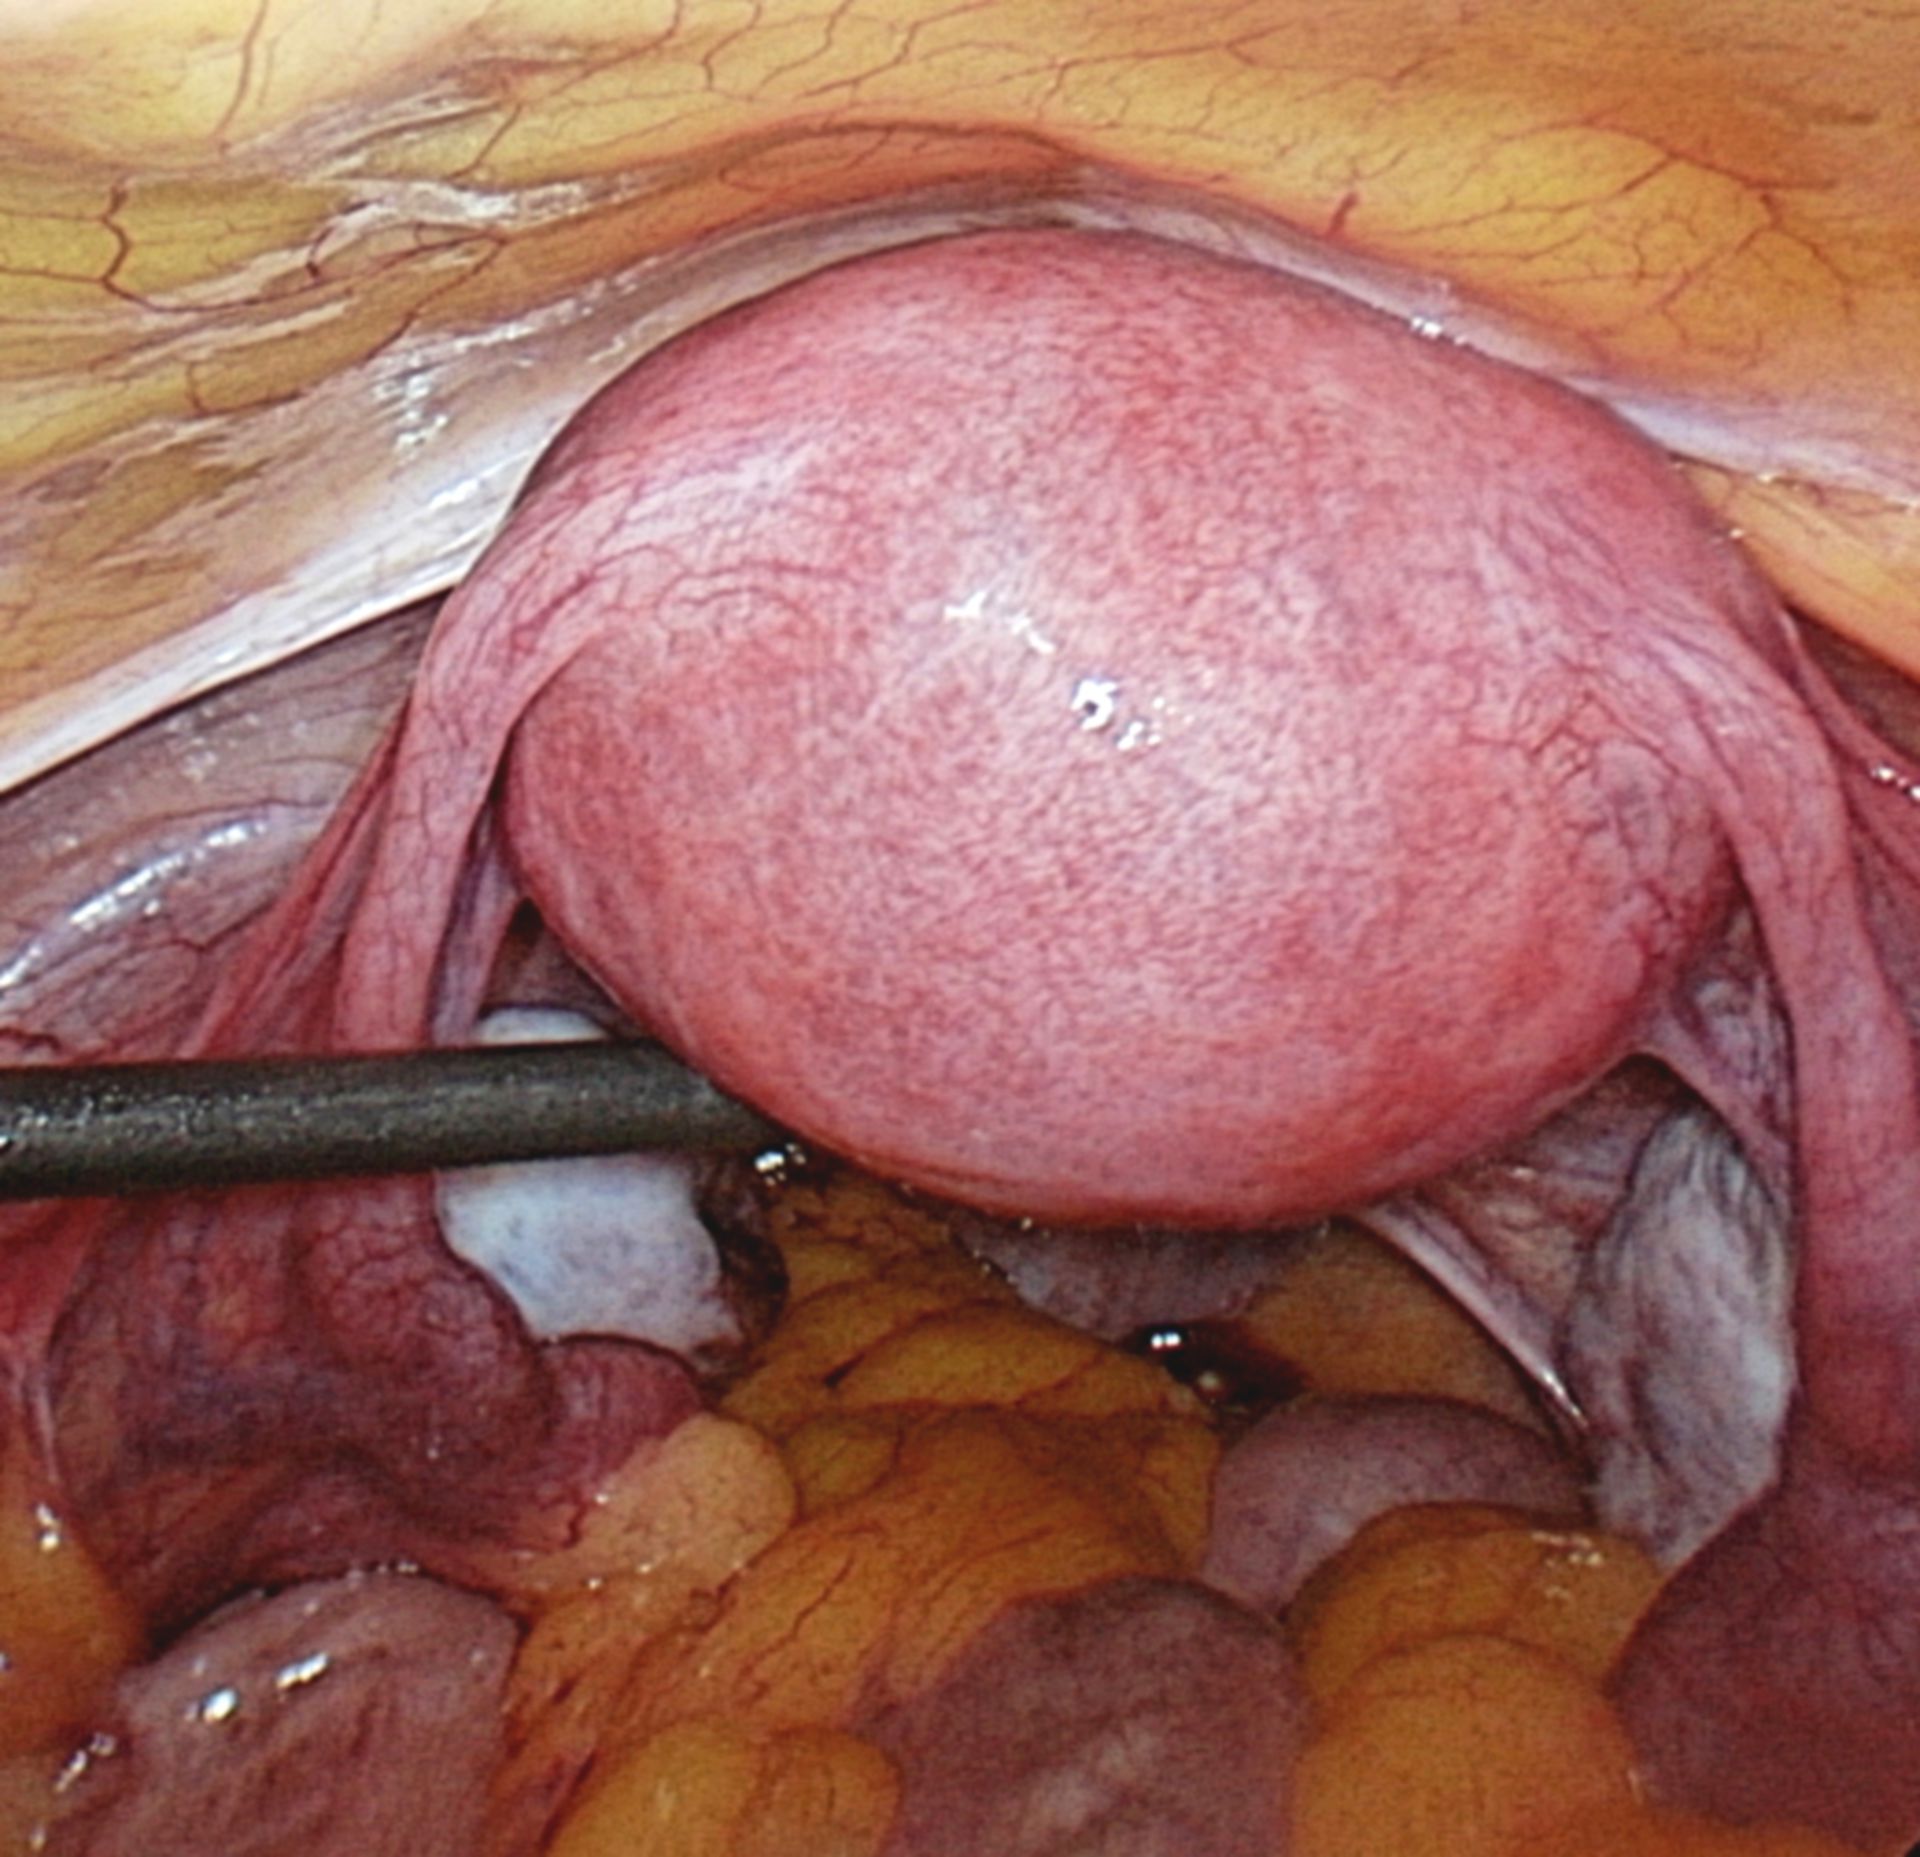 Uterus with Fallopian tubes and ovaries